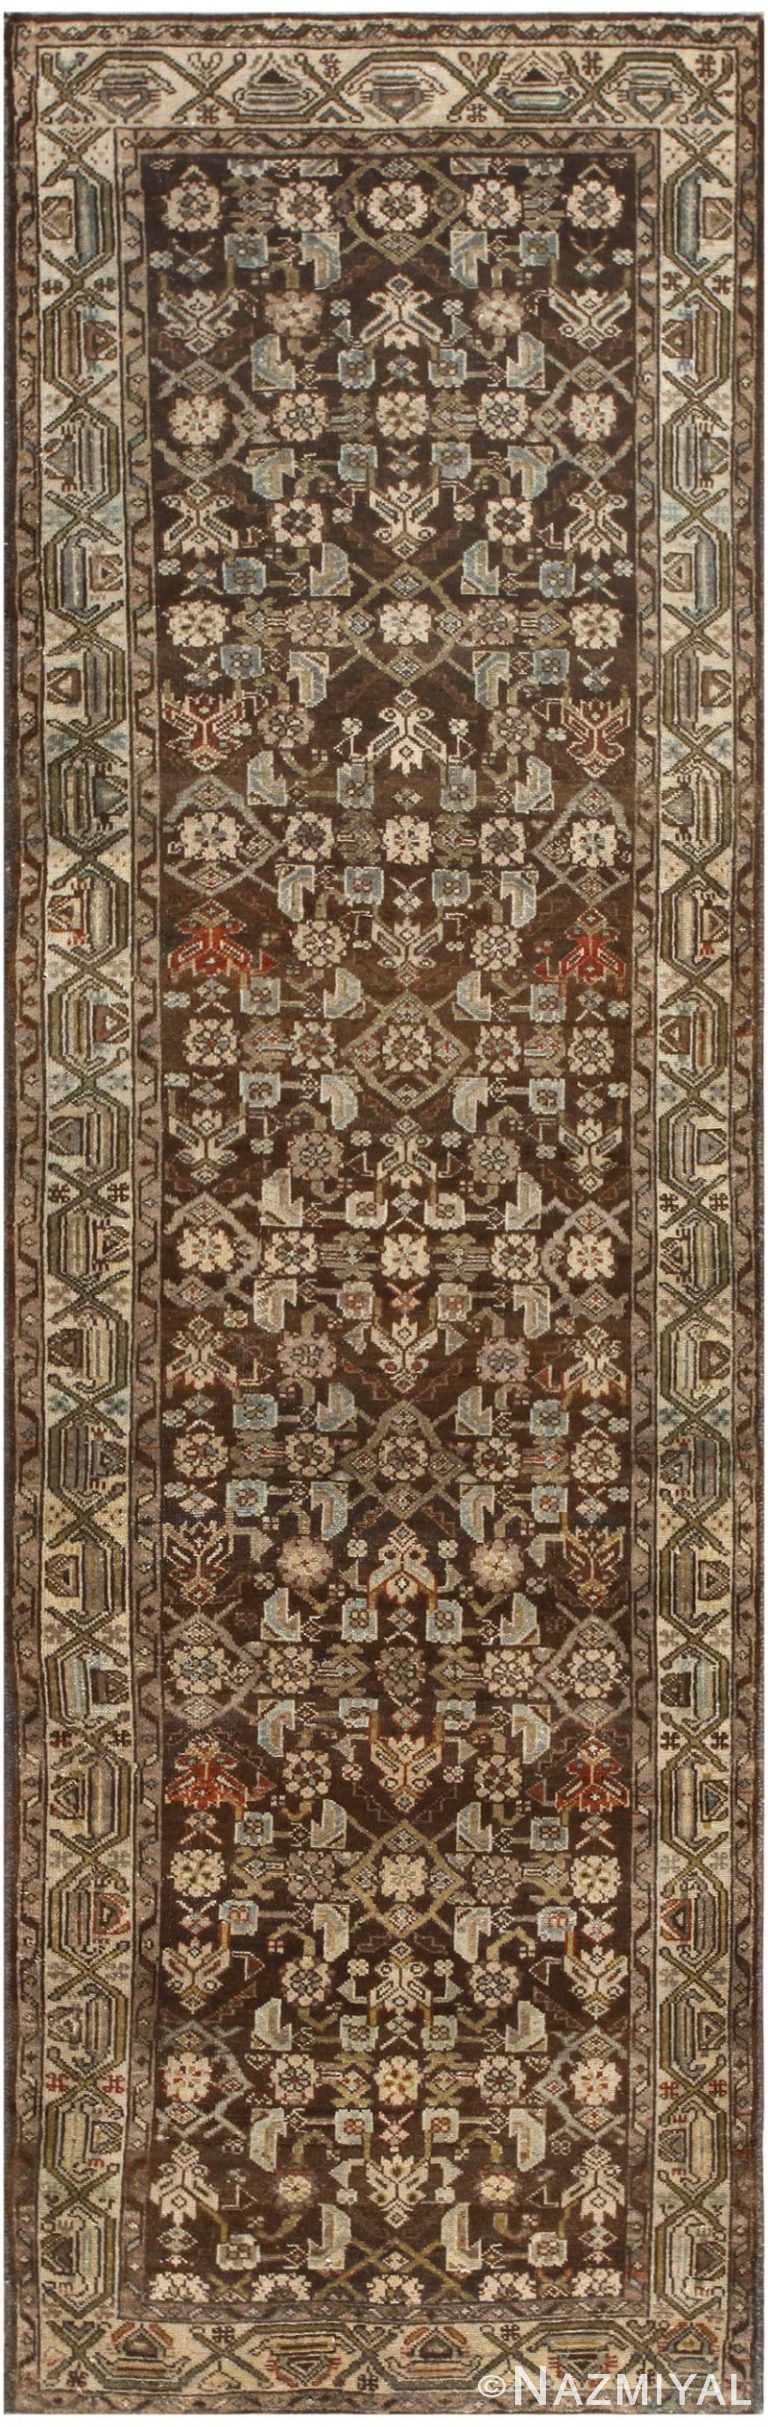 Antique Persian Malayer Runner 48108 Detail/Large View